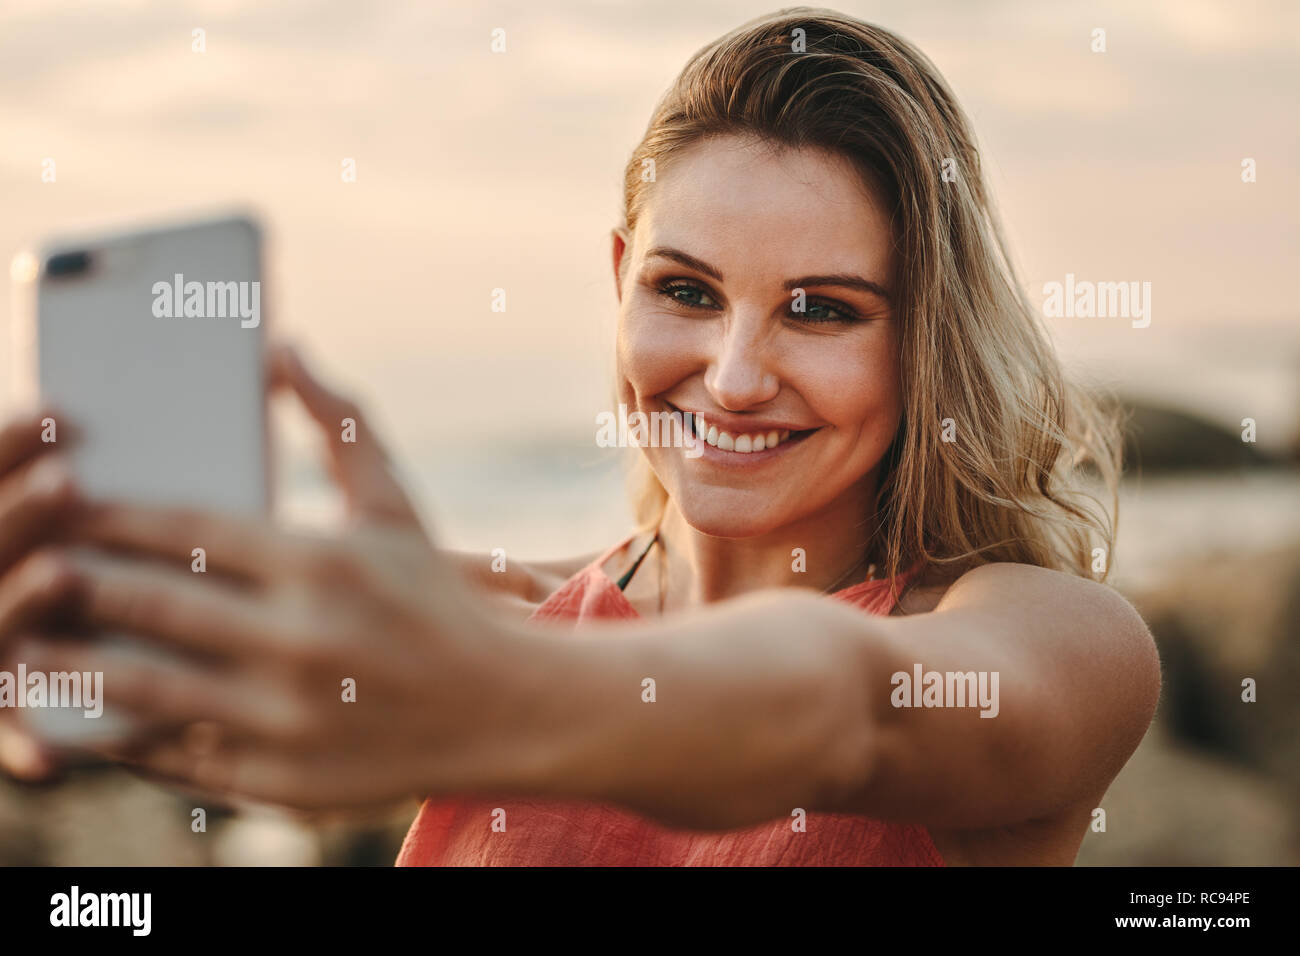 Smiling woman on vacation taking a selfie using mobile phone. Close up of a happy woman holding a cell phone and taking a selfie standing at the beach Stock Photo